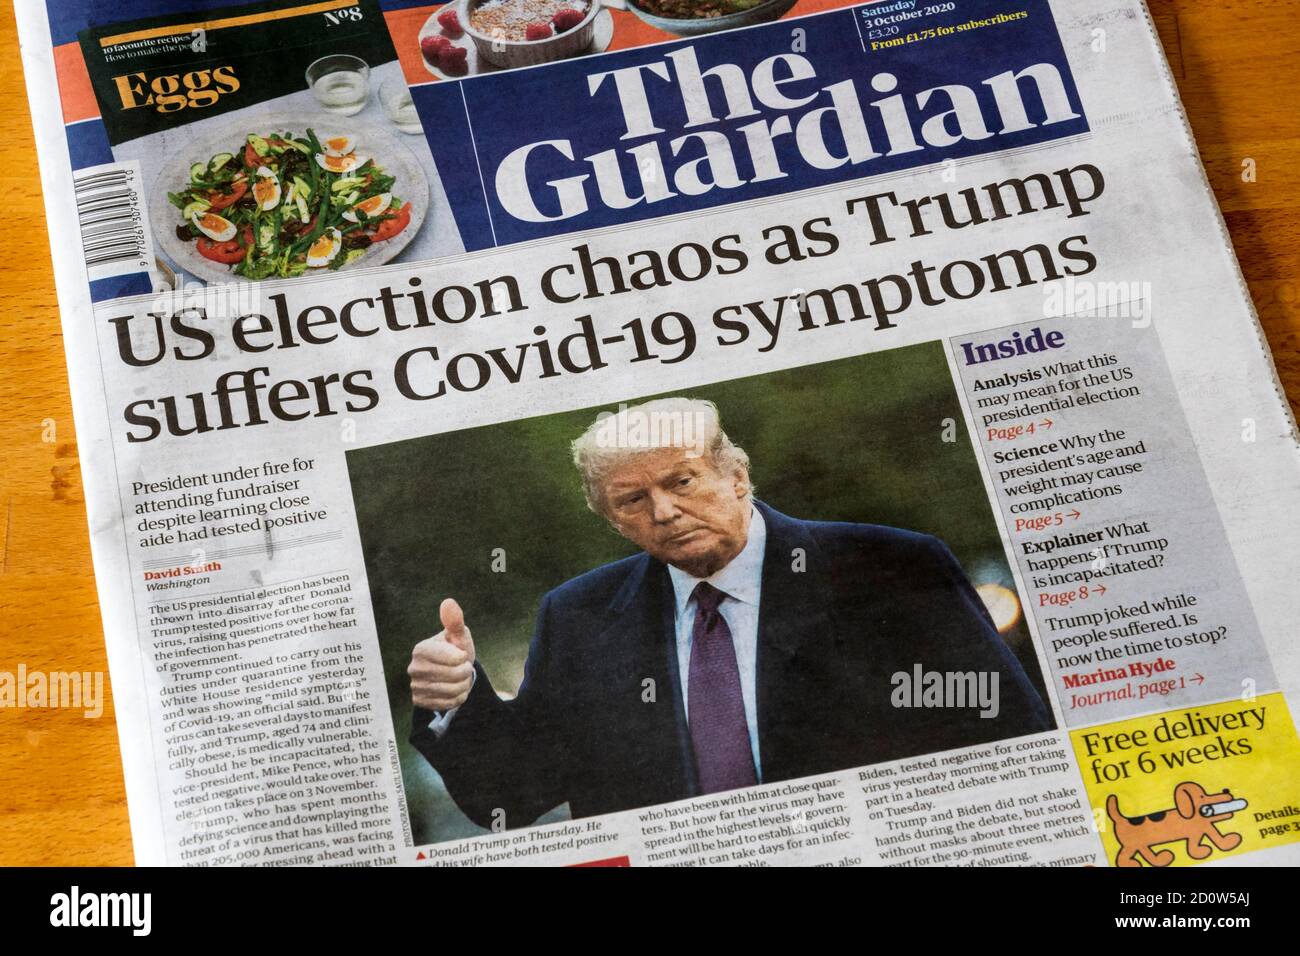 Headline on front page of The Guardian newspaper of 3 October 2020 says US election chaos as Trump suffers Covid-19 symptoms. Stock Photo